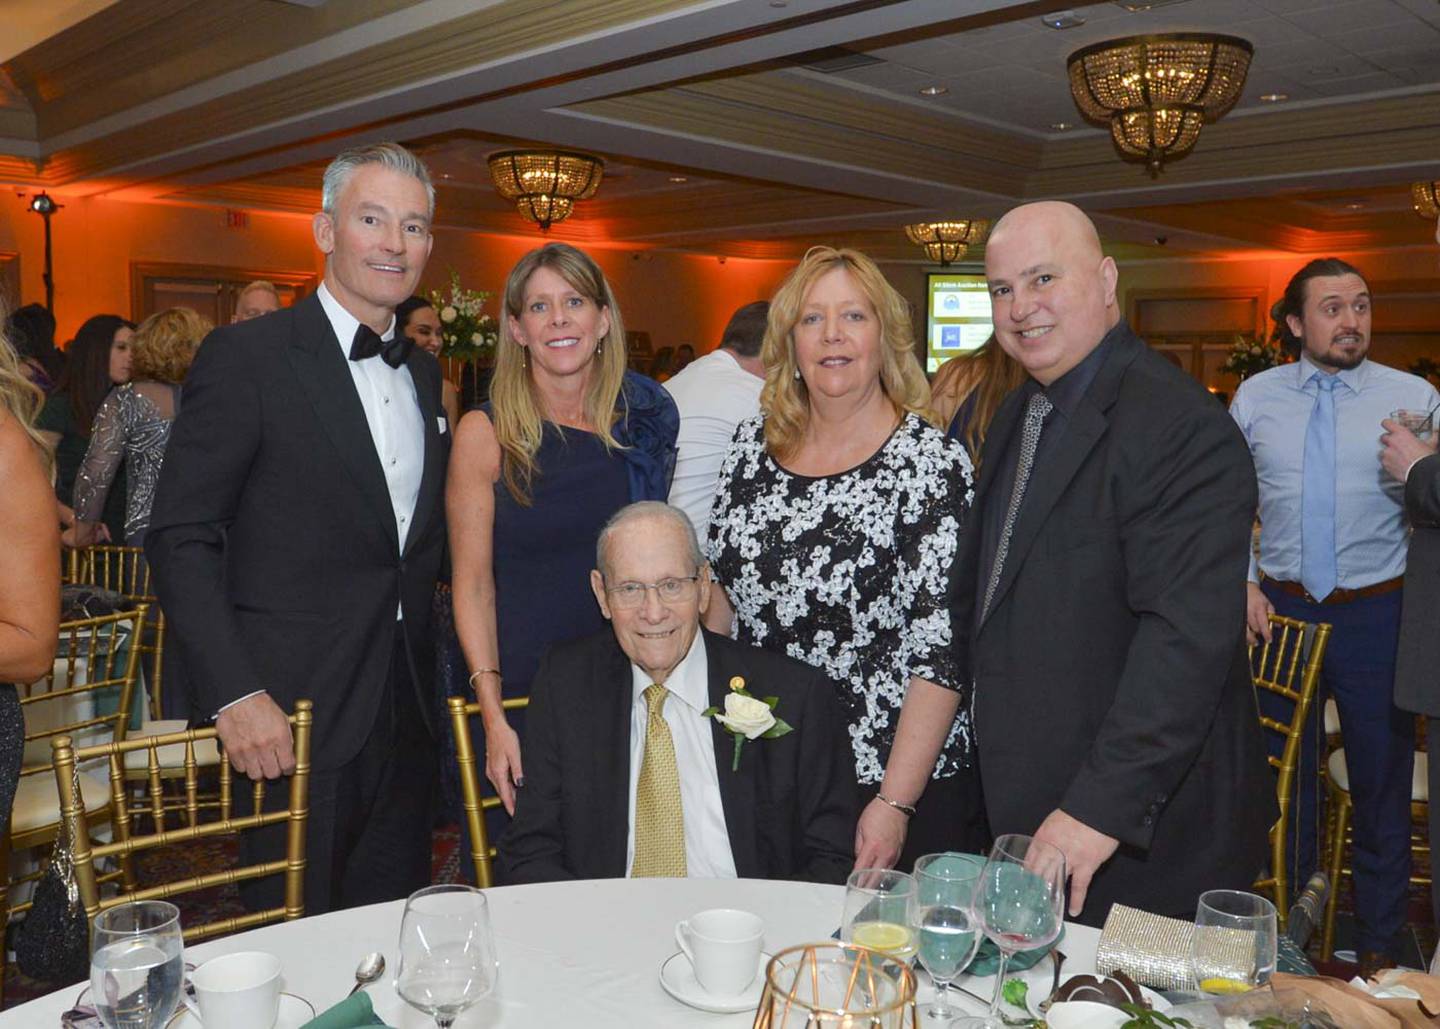 The Greater Joliet Area YMCA honored Joliet native Bill Lauer (center, seated) longtime member and volunteer of the YMCA, at its gala on Feb. 24 February with the creation of the William R. Lauer Service to Youth Award and the establishment of the William R. Lauer Endowment Fund. Bill Lauer is pictured with his family, from left: Chuck Kinder, Patti Lauer, Bill Lauer, Sue Melone and Lou Melone.